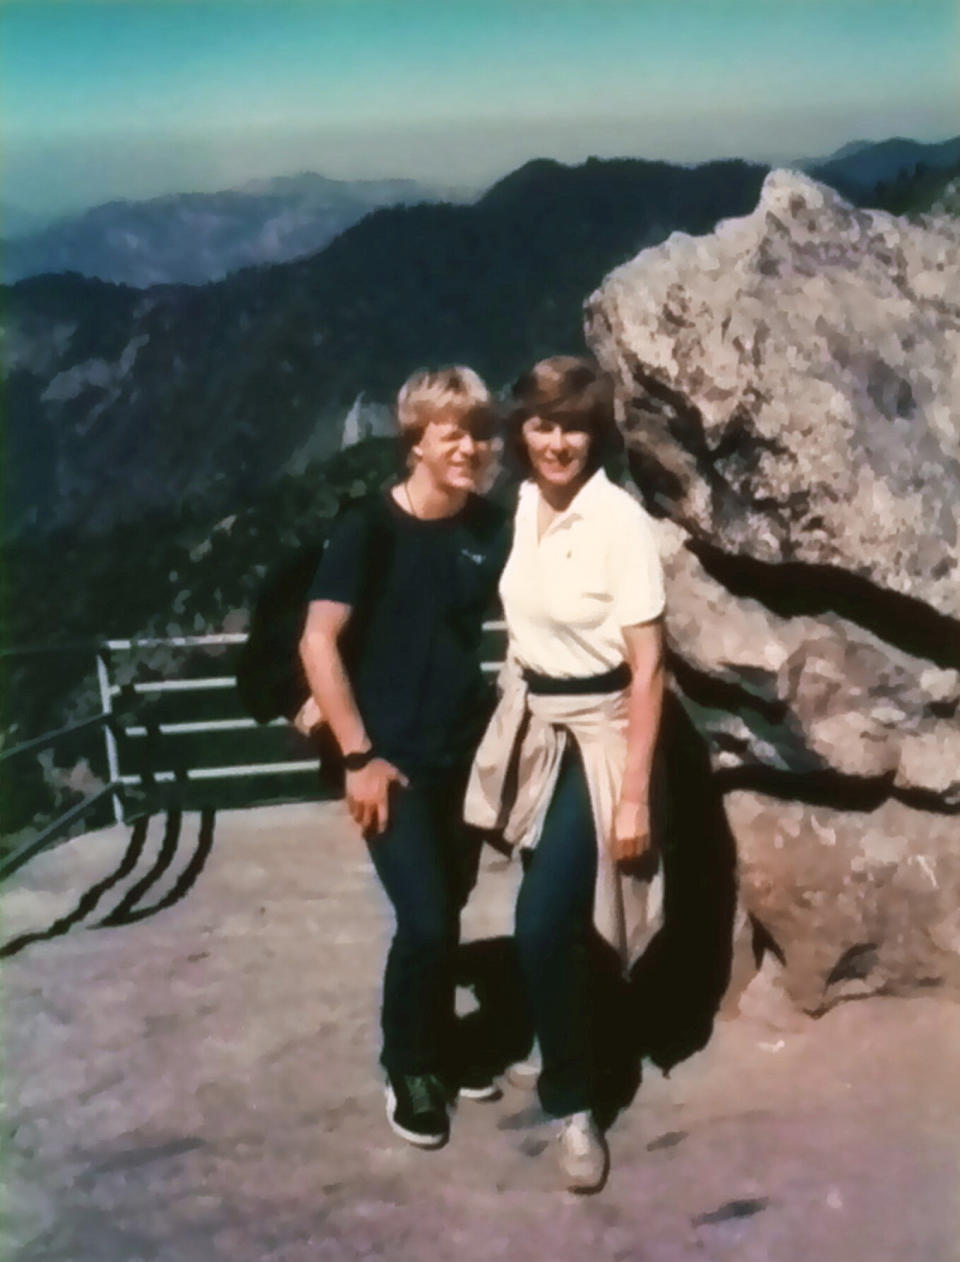 Jason and Judy hiking in the California Redwoods, ca. 1986. (Photo: Courtesy of Nancy Ward)